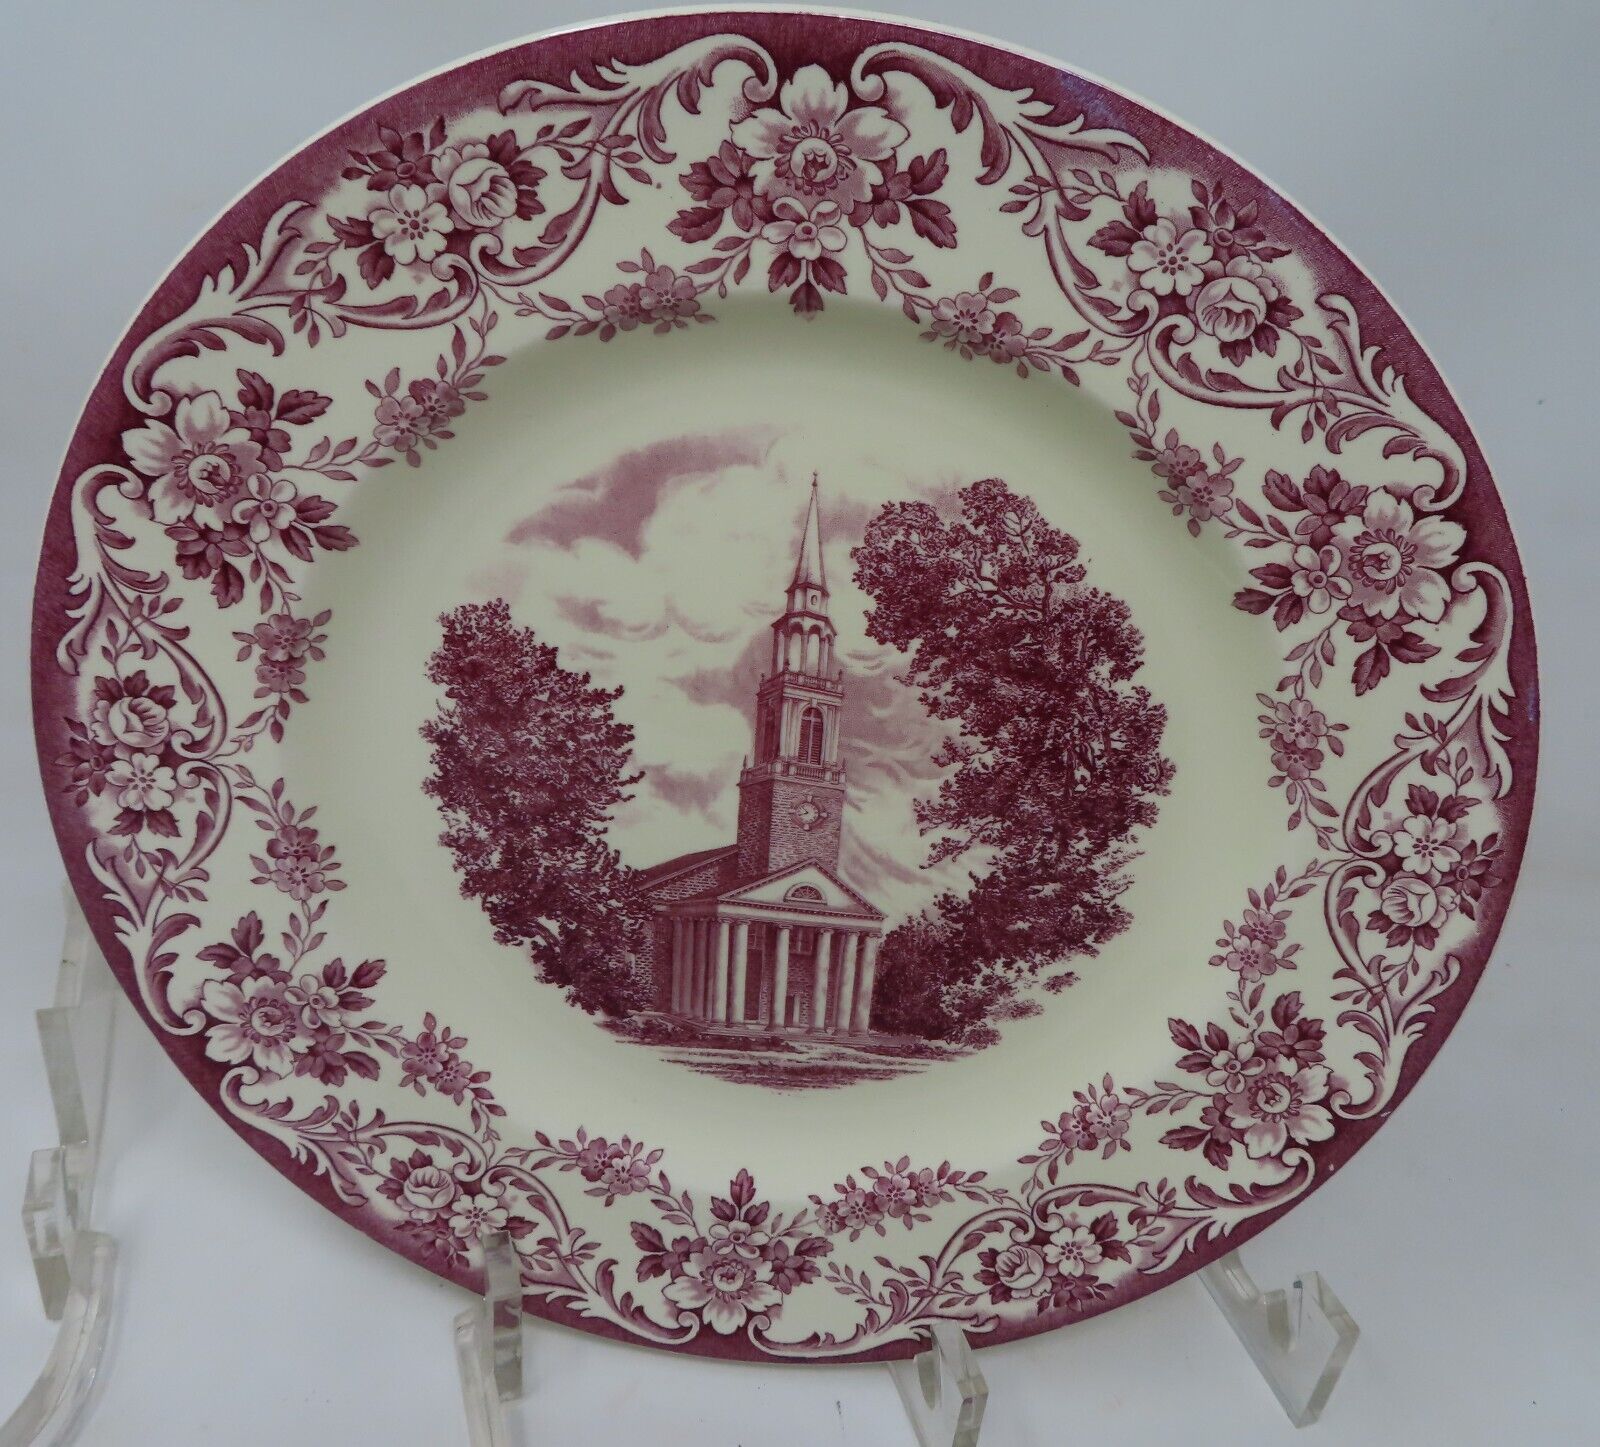 1 Vtg RED TRANSFERWARE 1932 WEDGEWOOD WHEATON College Plate MARY LYON HALL